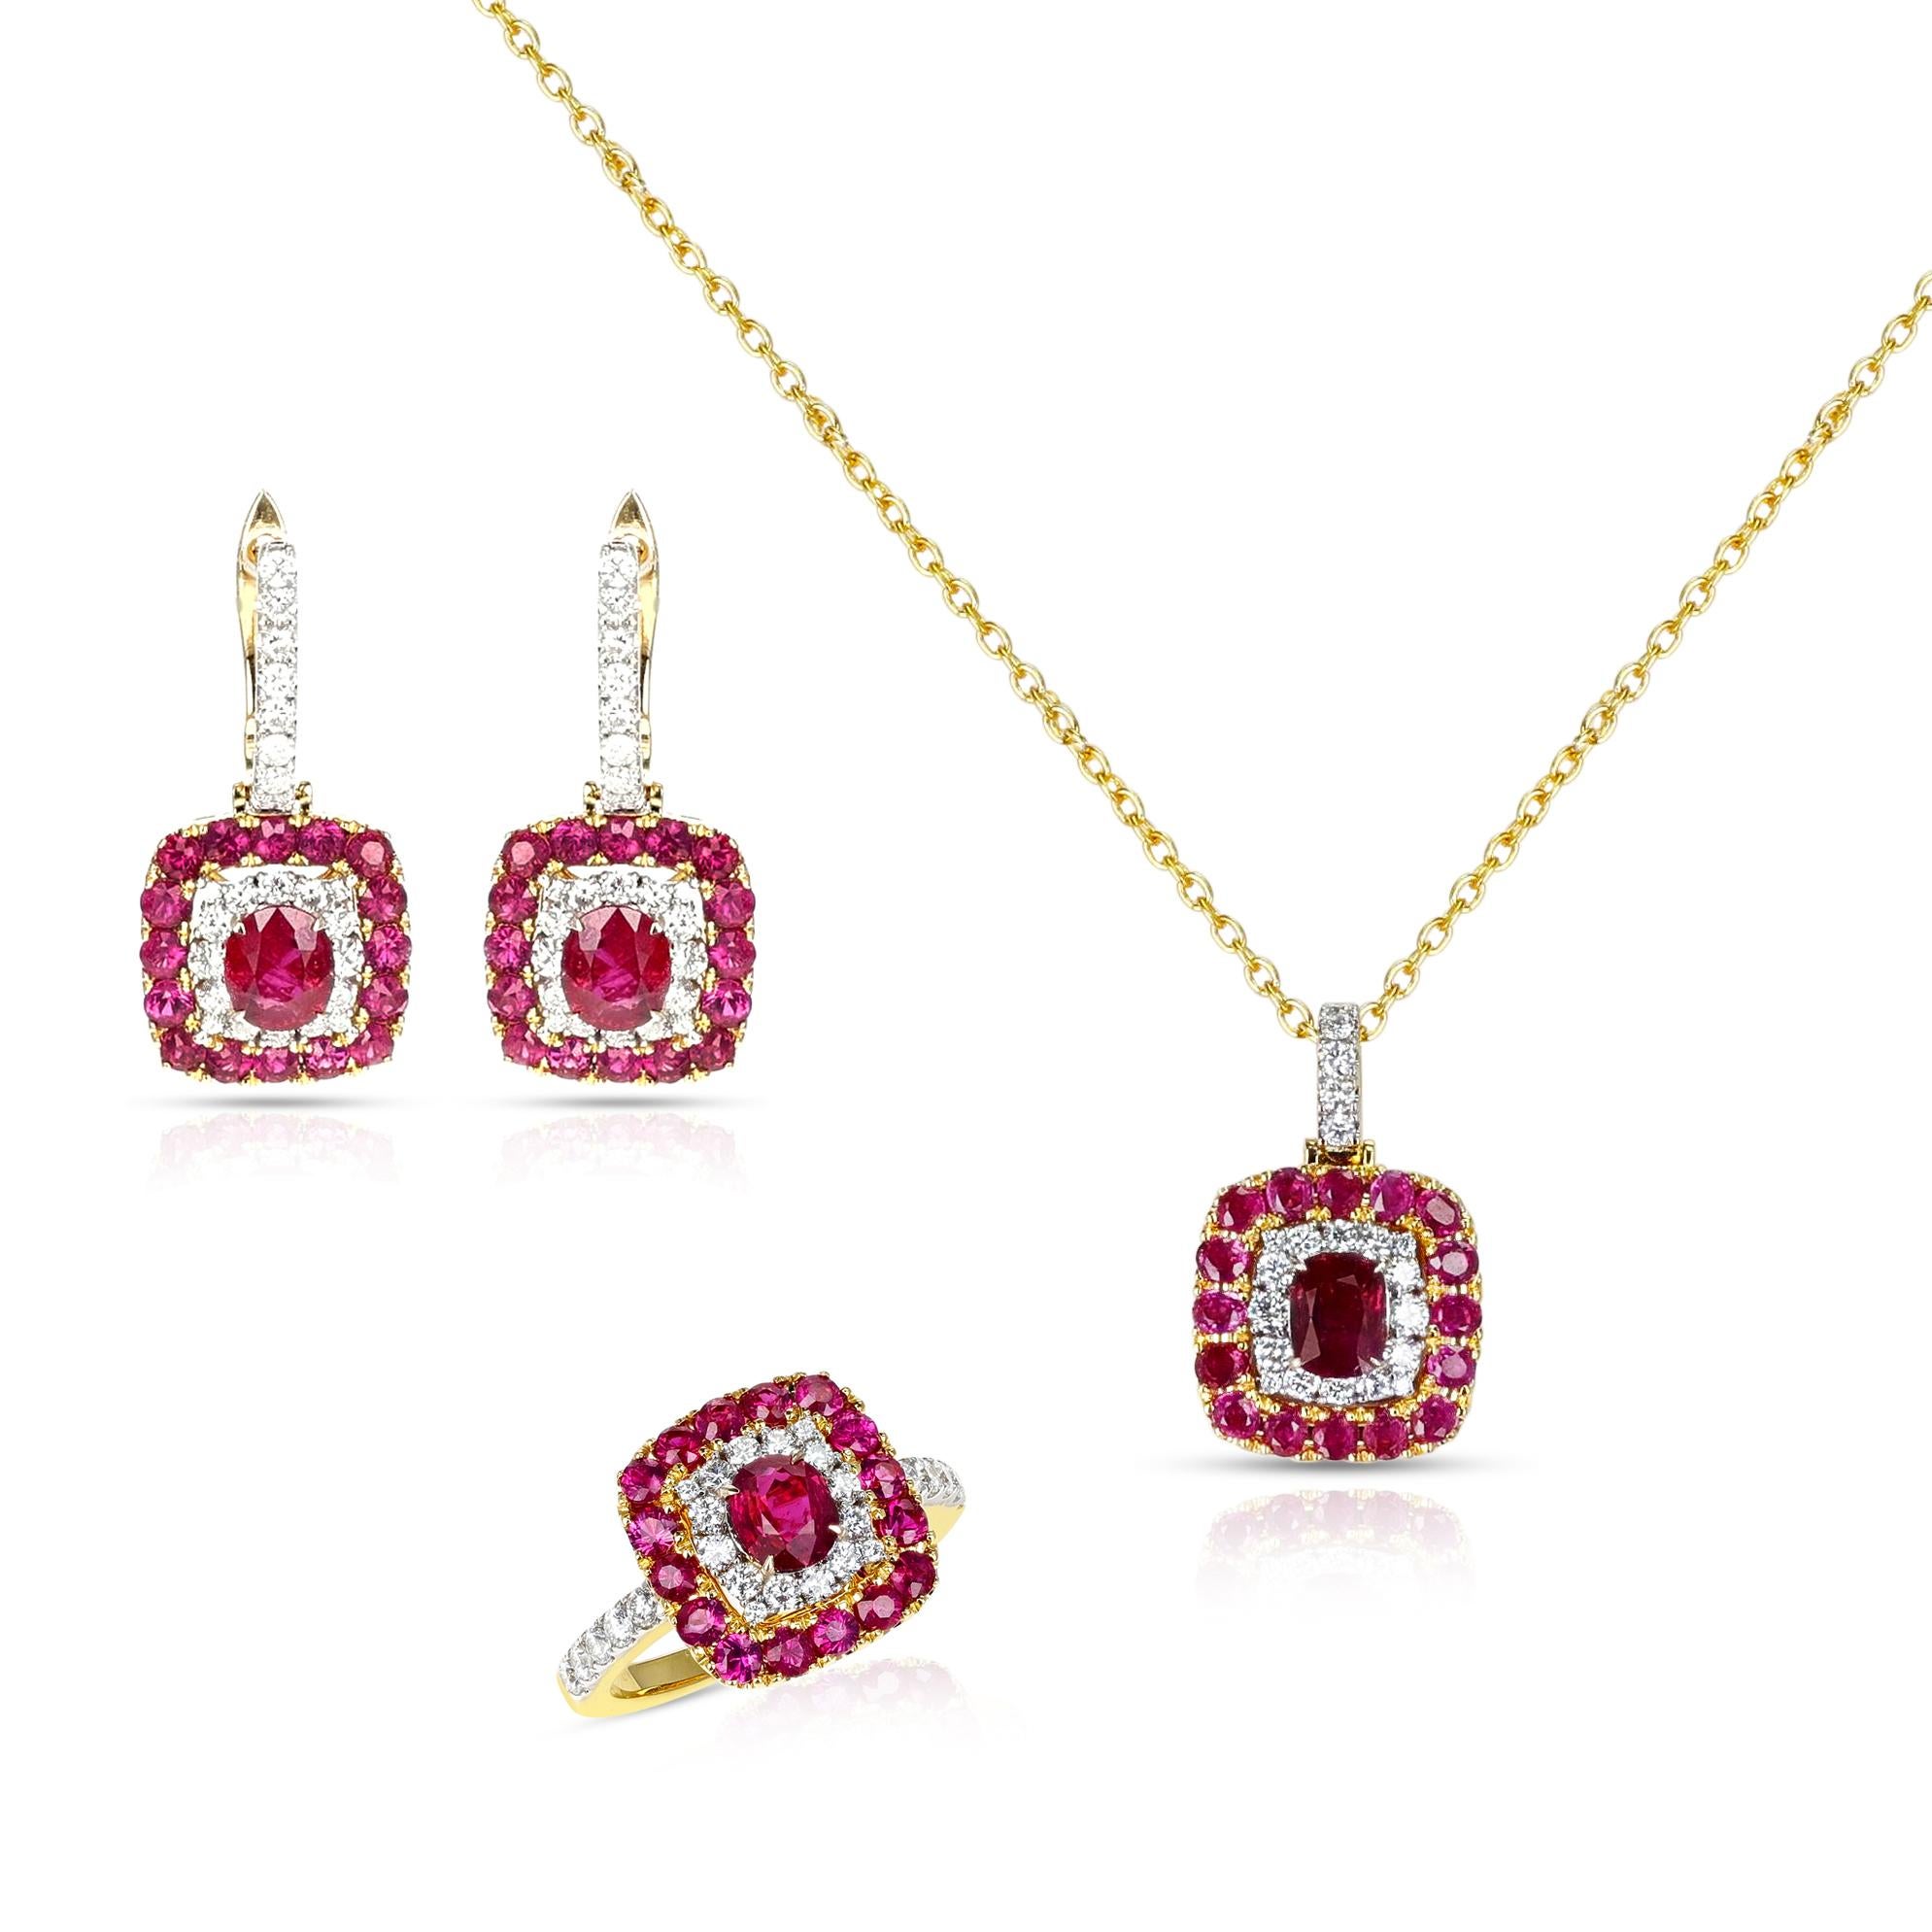 Women's or Men's Unheated Burma Ruby Pigeon Blood Set with Ring, Pendant and Earrings, 18k For Sale